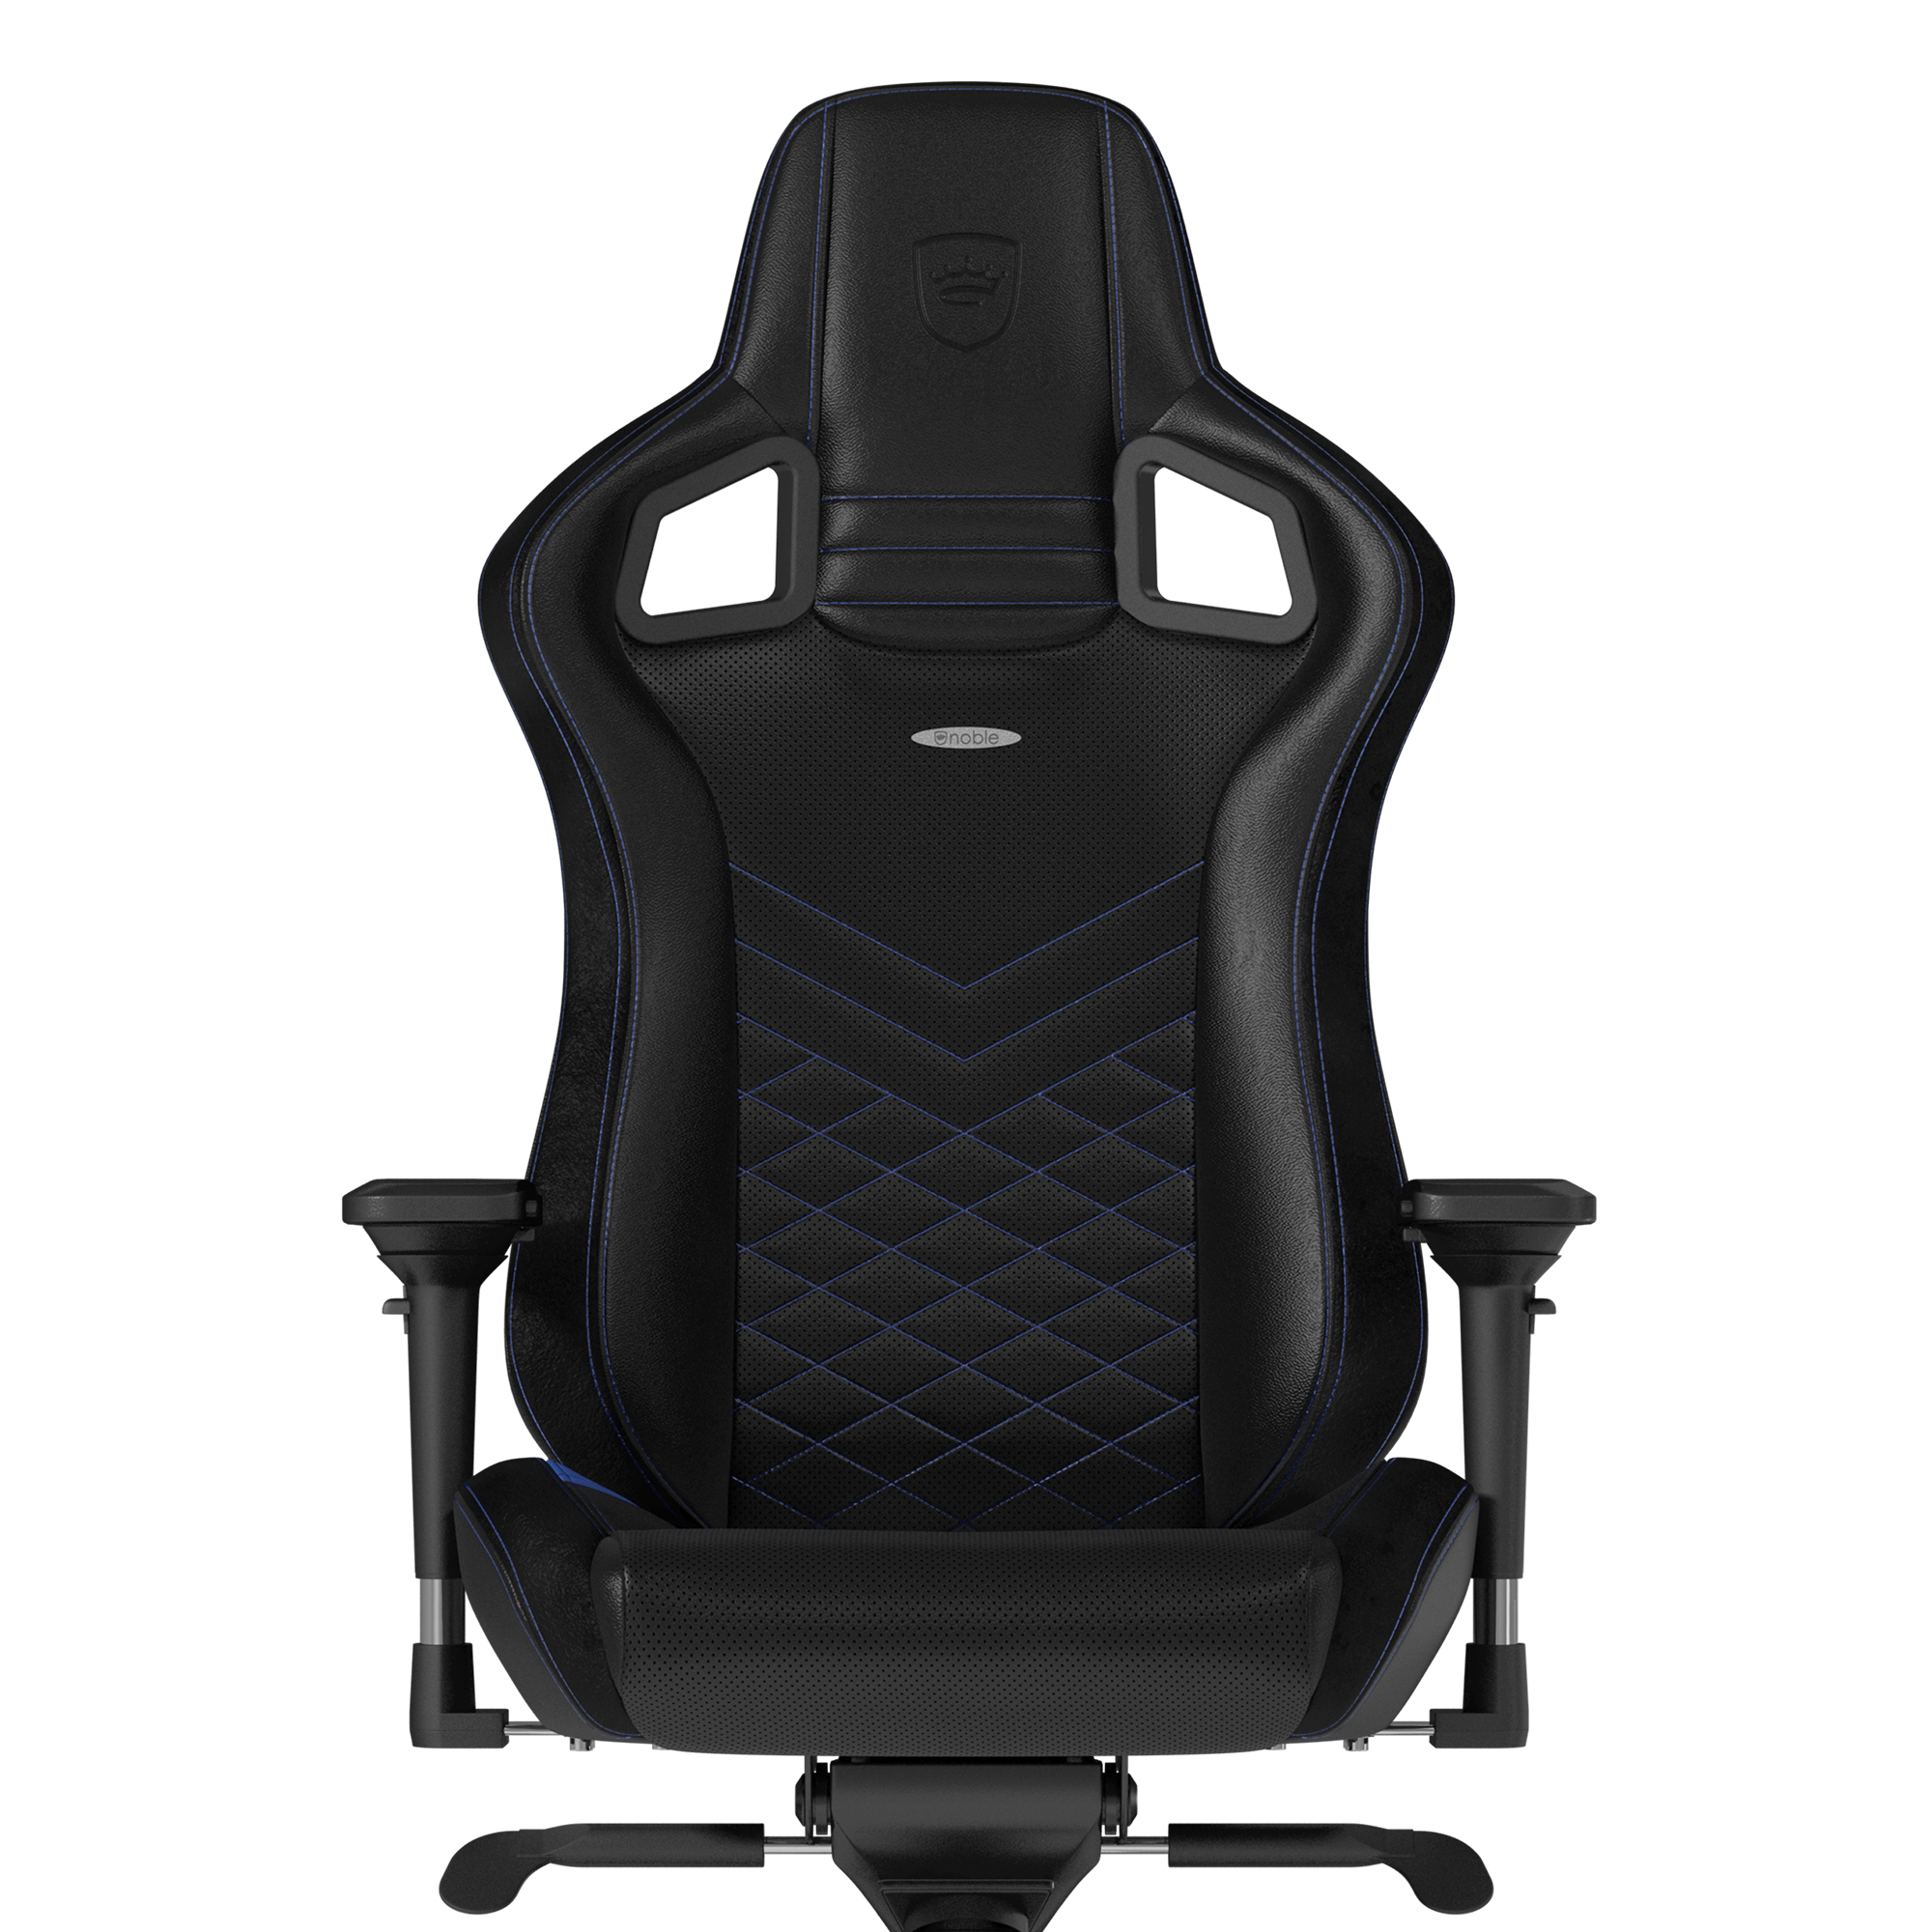 noblechairs - noblechairs EPIC Gaming Chair - Black/Blue